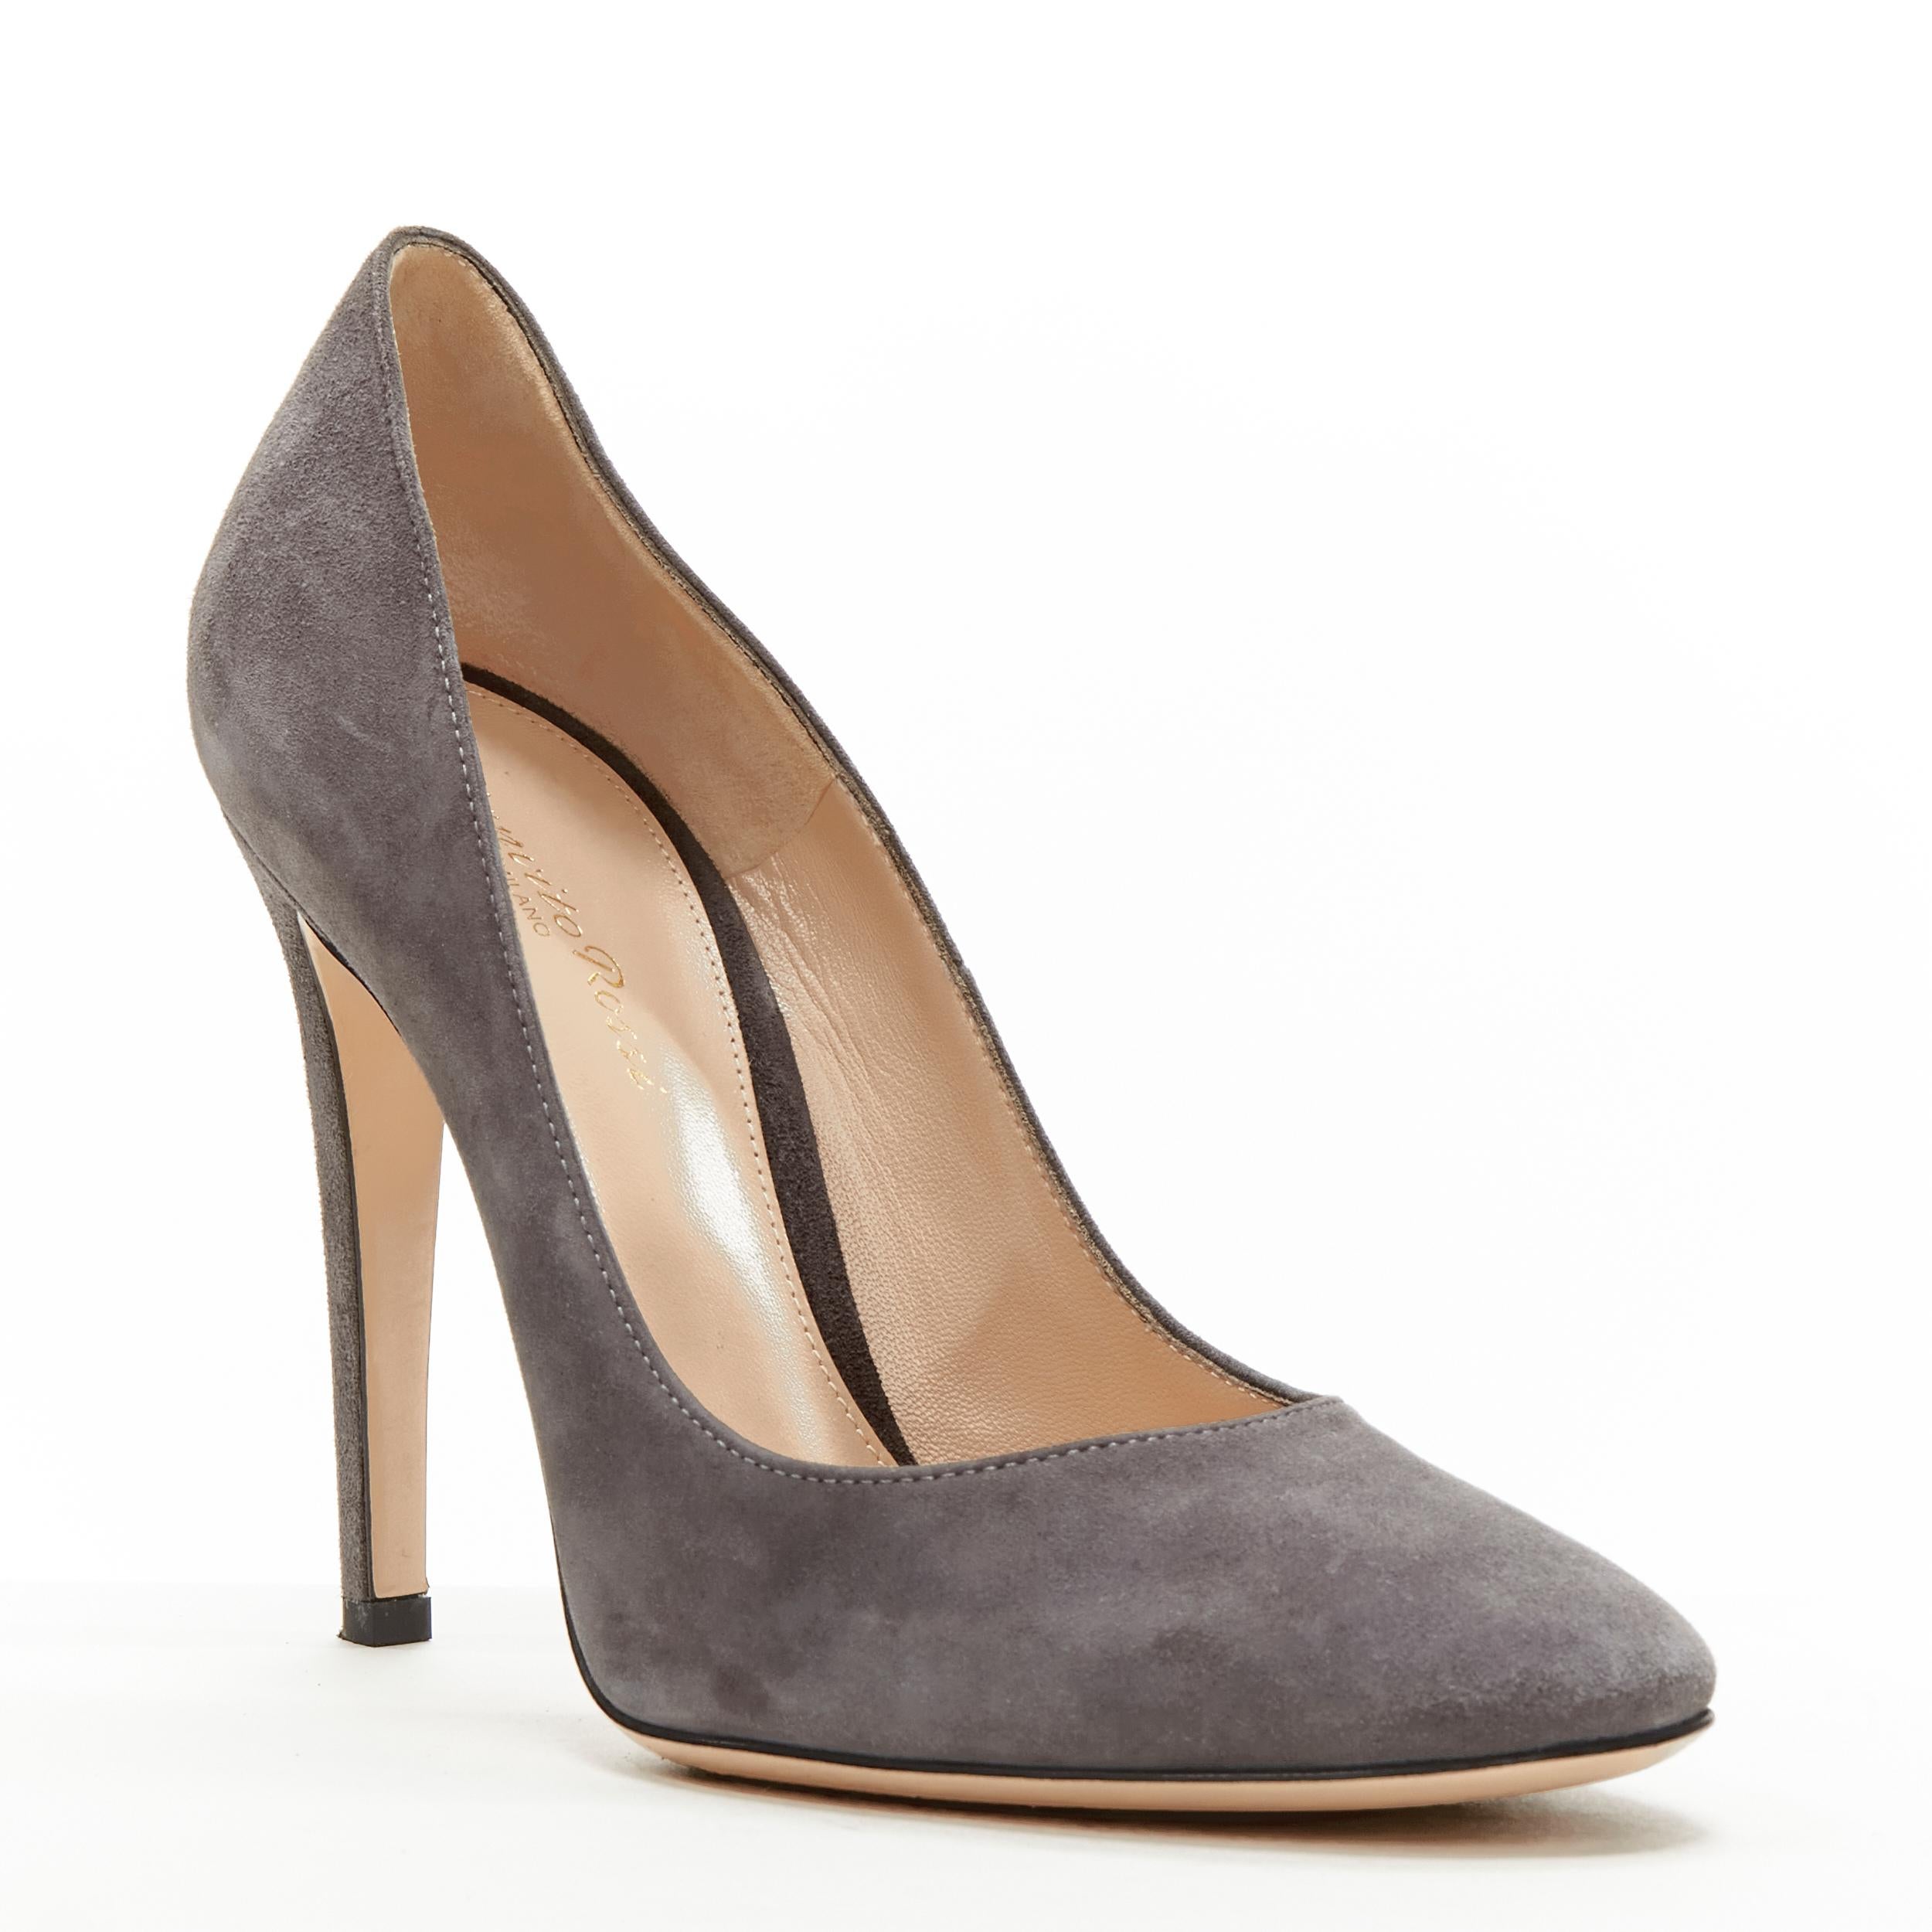 GIANVITO ROSSI grey suede almond toe stiletto heel pump EU38 
Reference: LNKO/A01992 
Brand: Gianvito Rossi 
Material: Suede 
Color: Grey 
Pattern: Solid 
Made in: Italy 

CONDITION: 
Condition: Excellent, this item was pre-owned and is in excellent